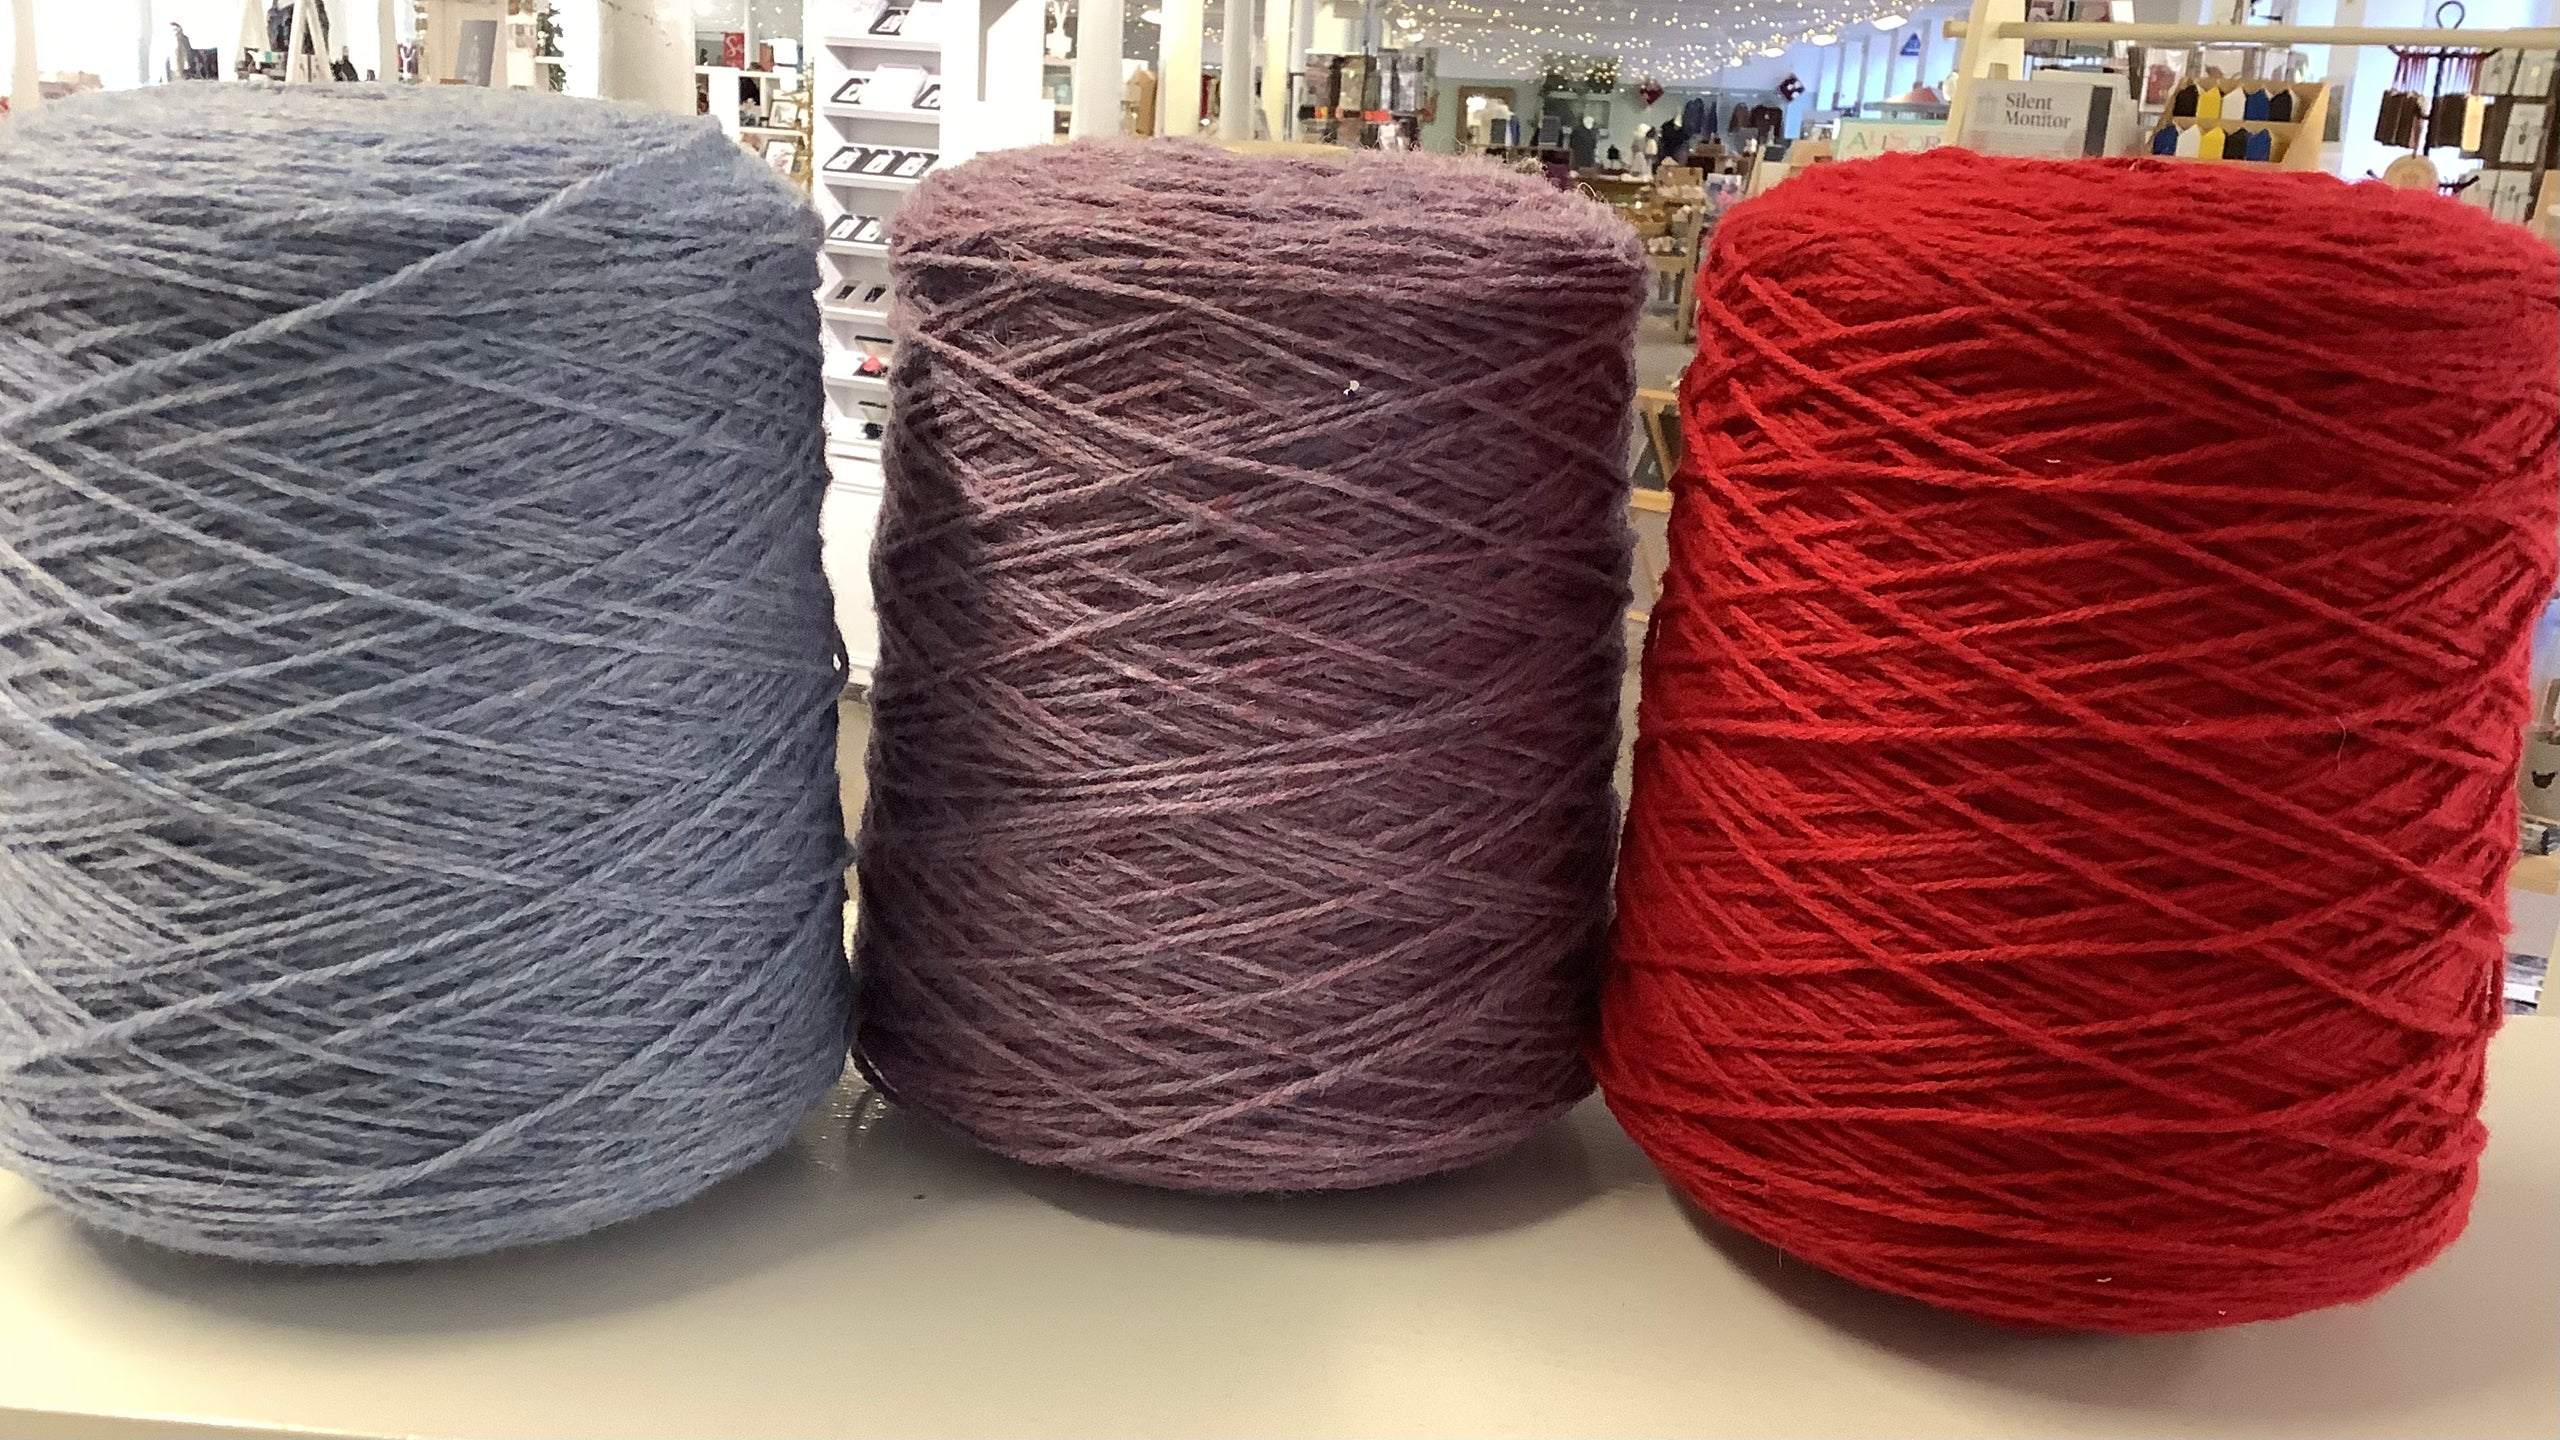 Aran Yarn One Kilo Weight Cones - Various colours available